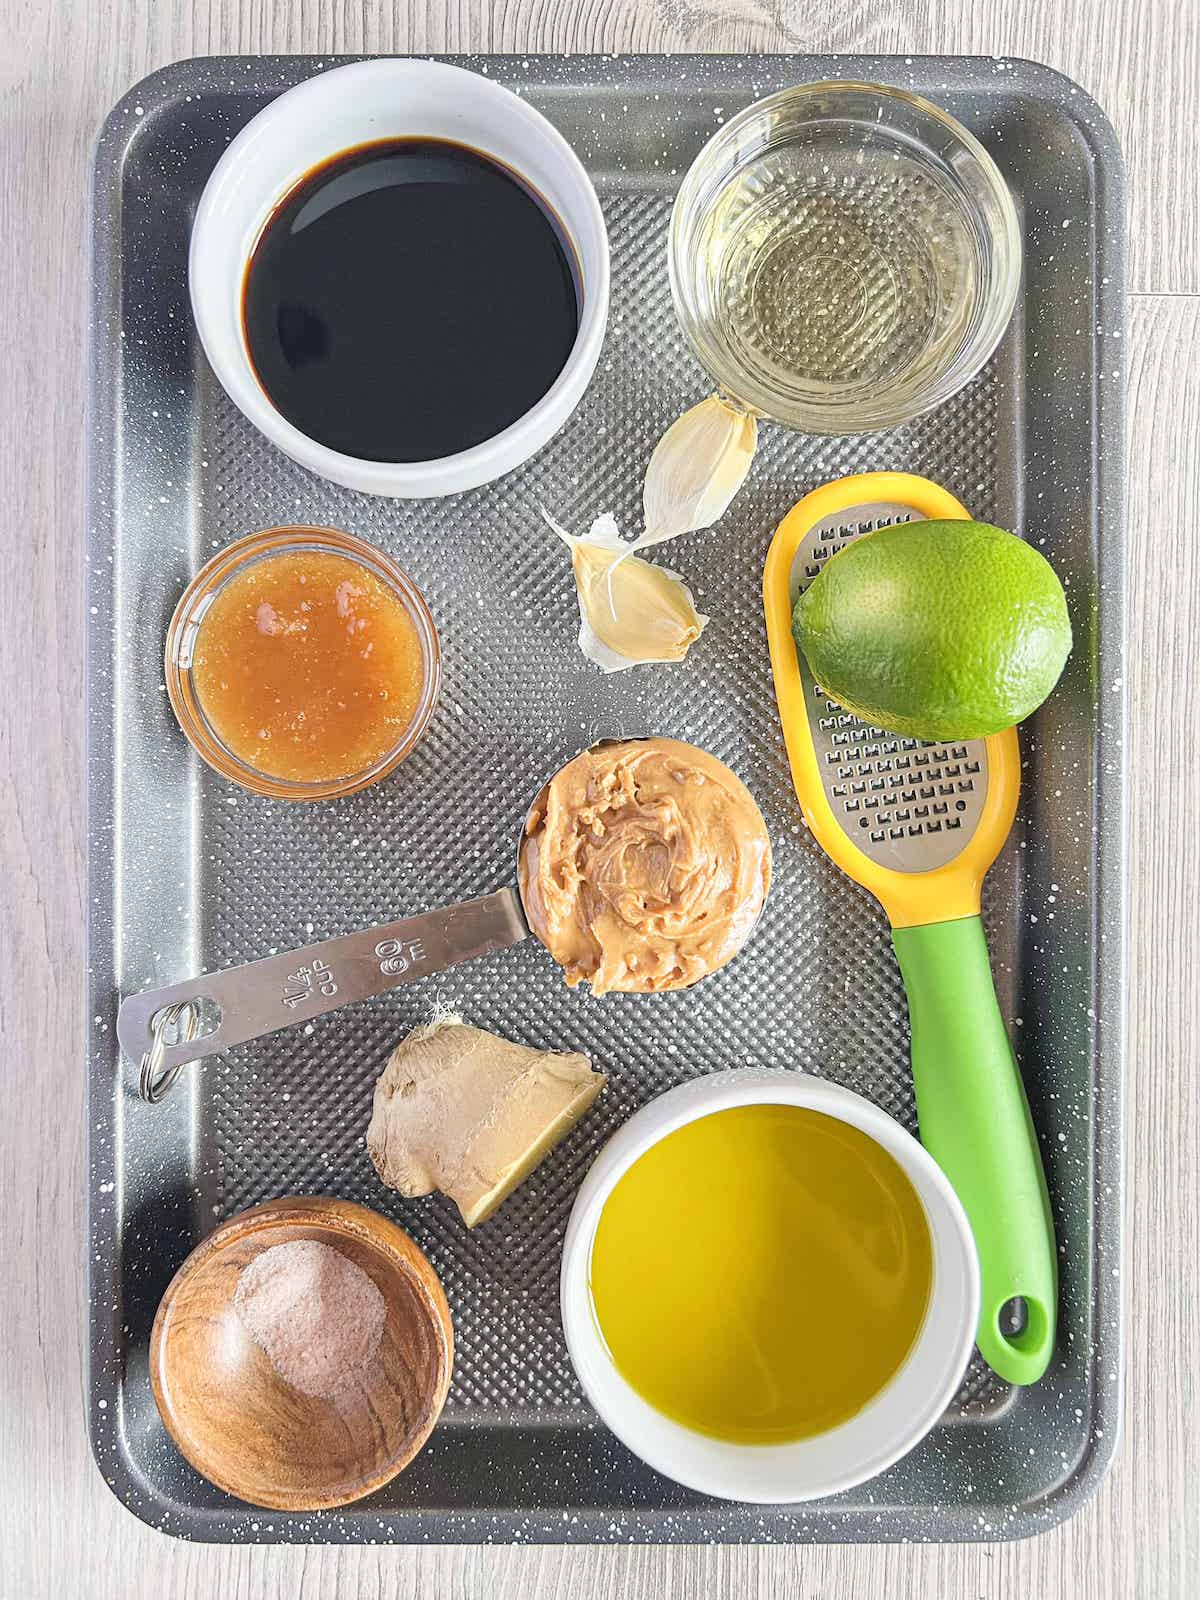 Ingredients for creamy peanut dressing on a silver baking sheet.